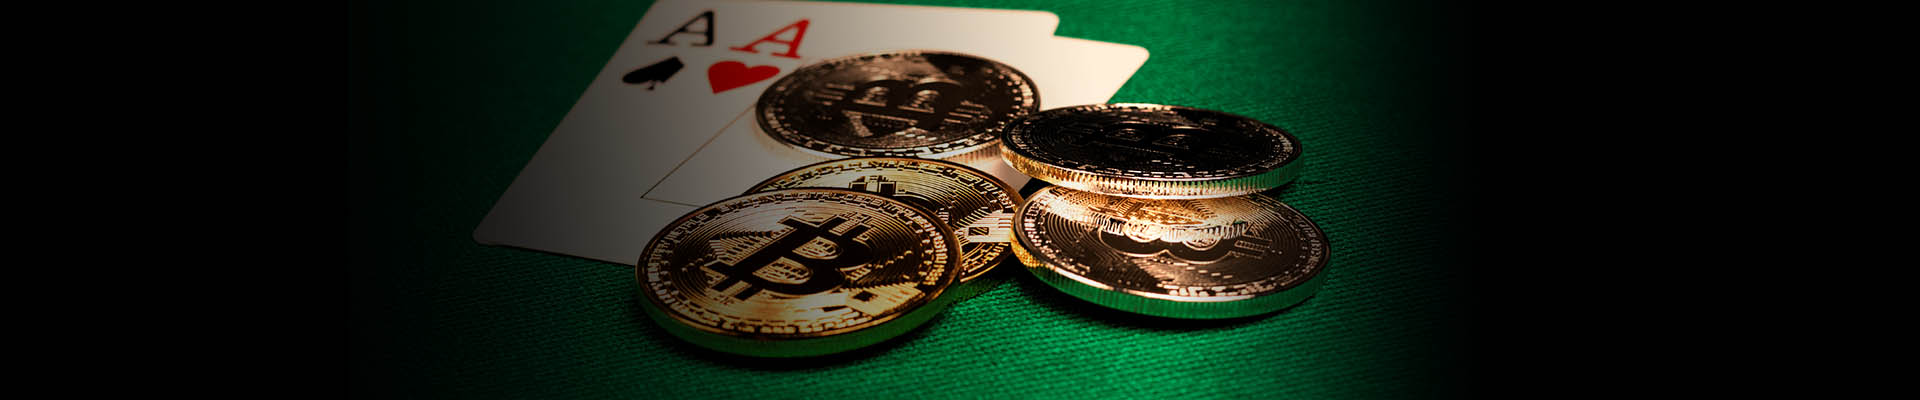 The Stuff About crypto casino guides You Probably Hadn't Considered. And Really Should